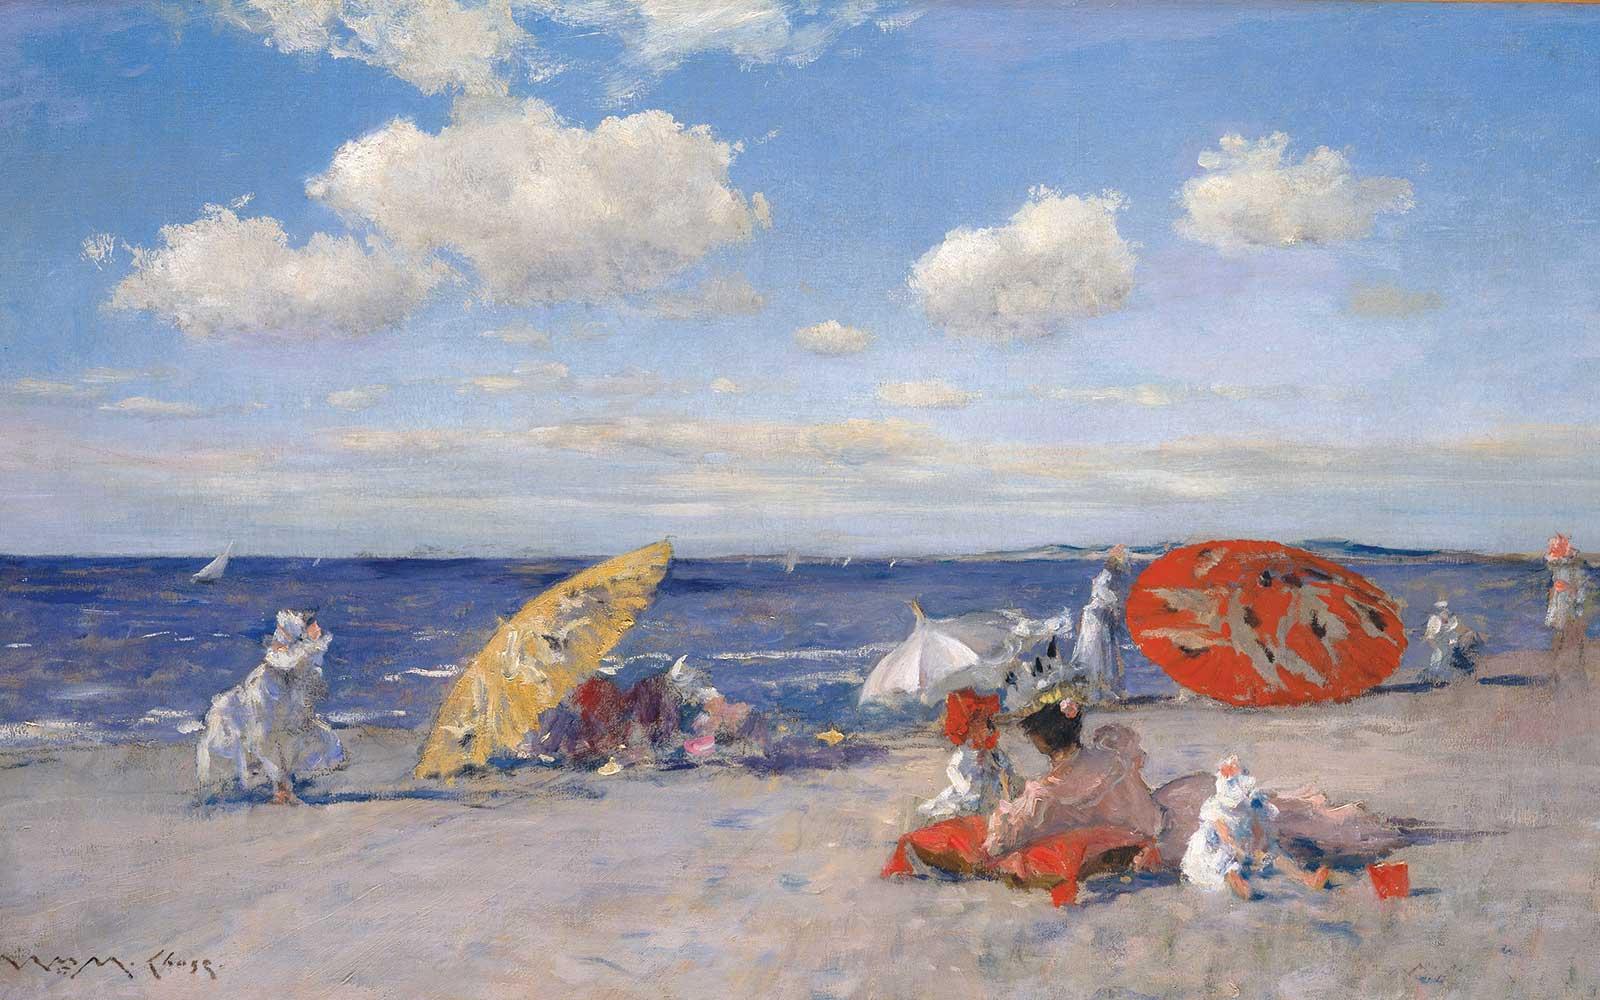 At the Seaside by William Merritt Chase.